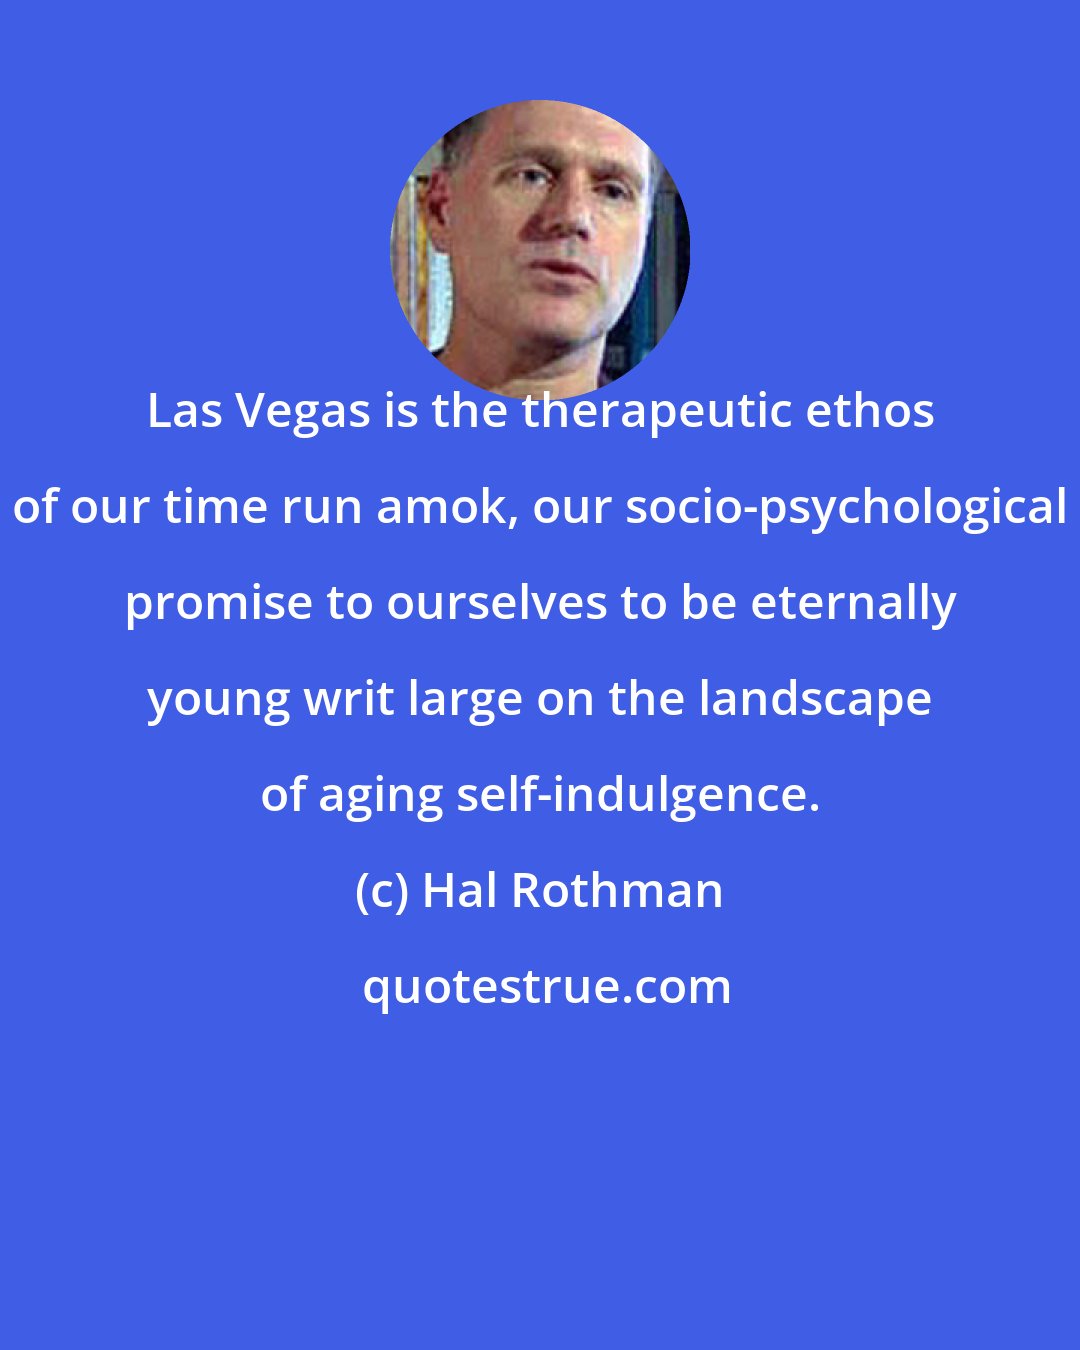 Hal Rothman: Las Vegas is the therapeutic ethos of our time run amok, our socio-psychological promise to ourselves to be eternally young writ large on the landscape of aging self-indulgence.